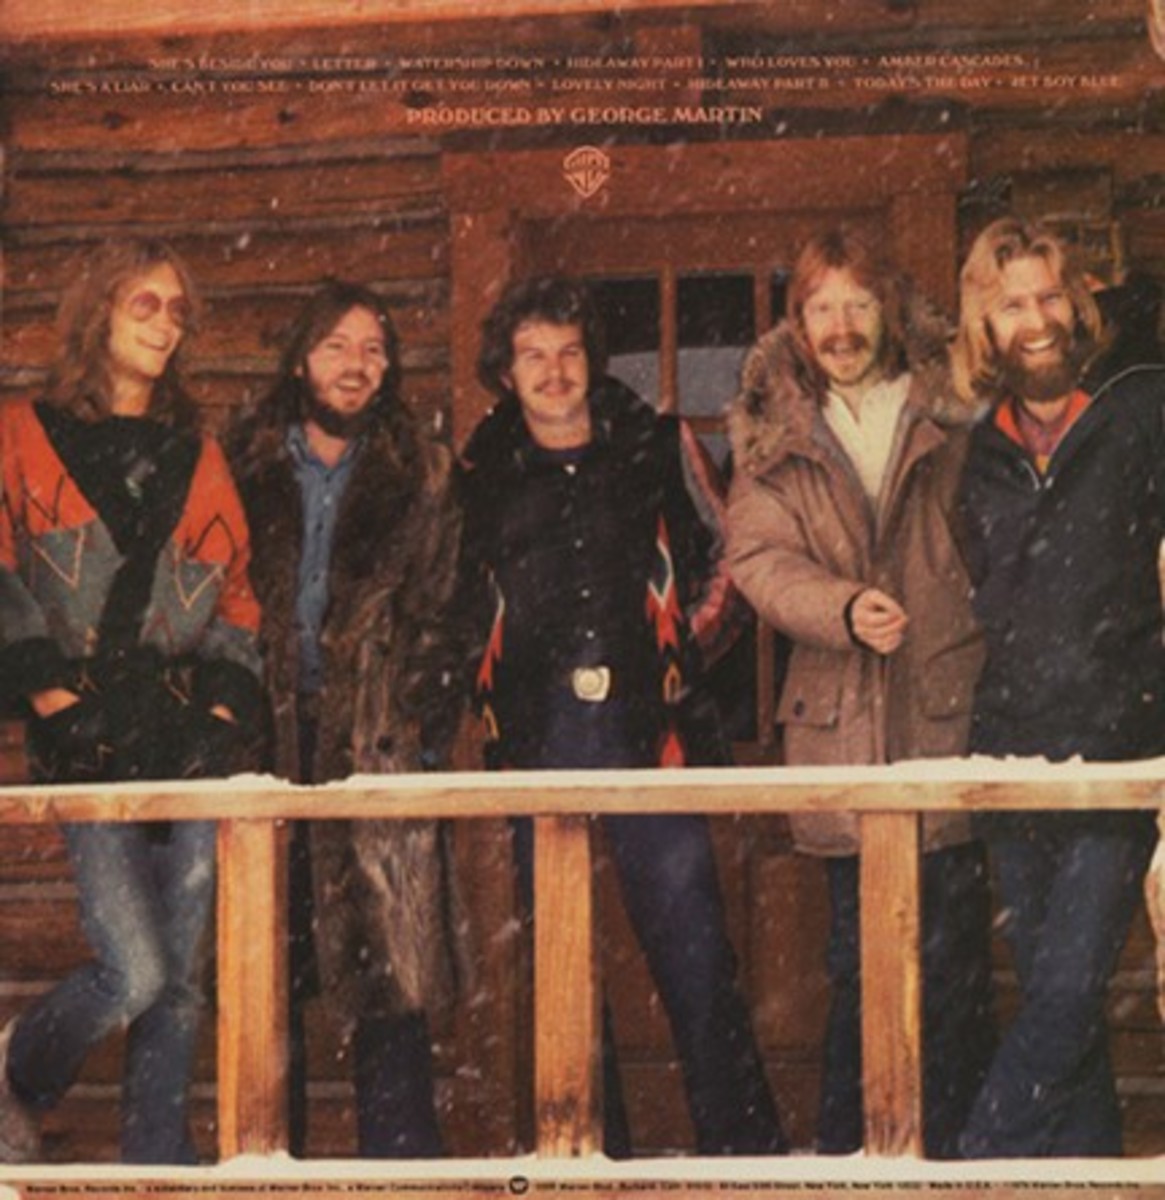 America’s 1976 “Hideaway” album with Willie Leacox 2nd from right